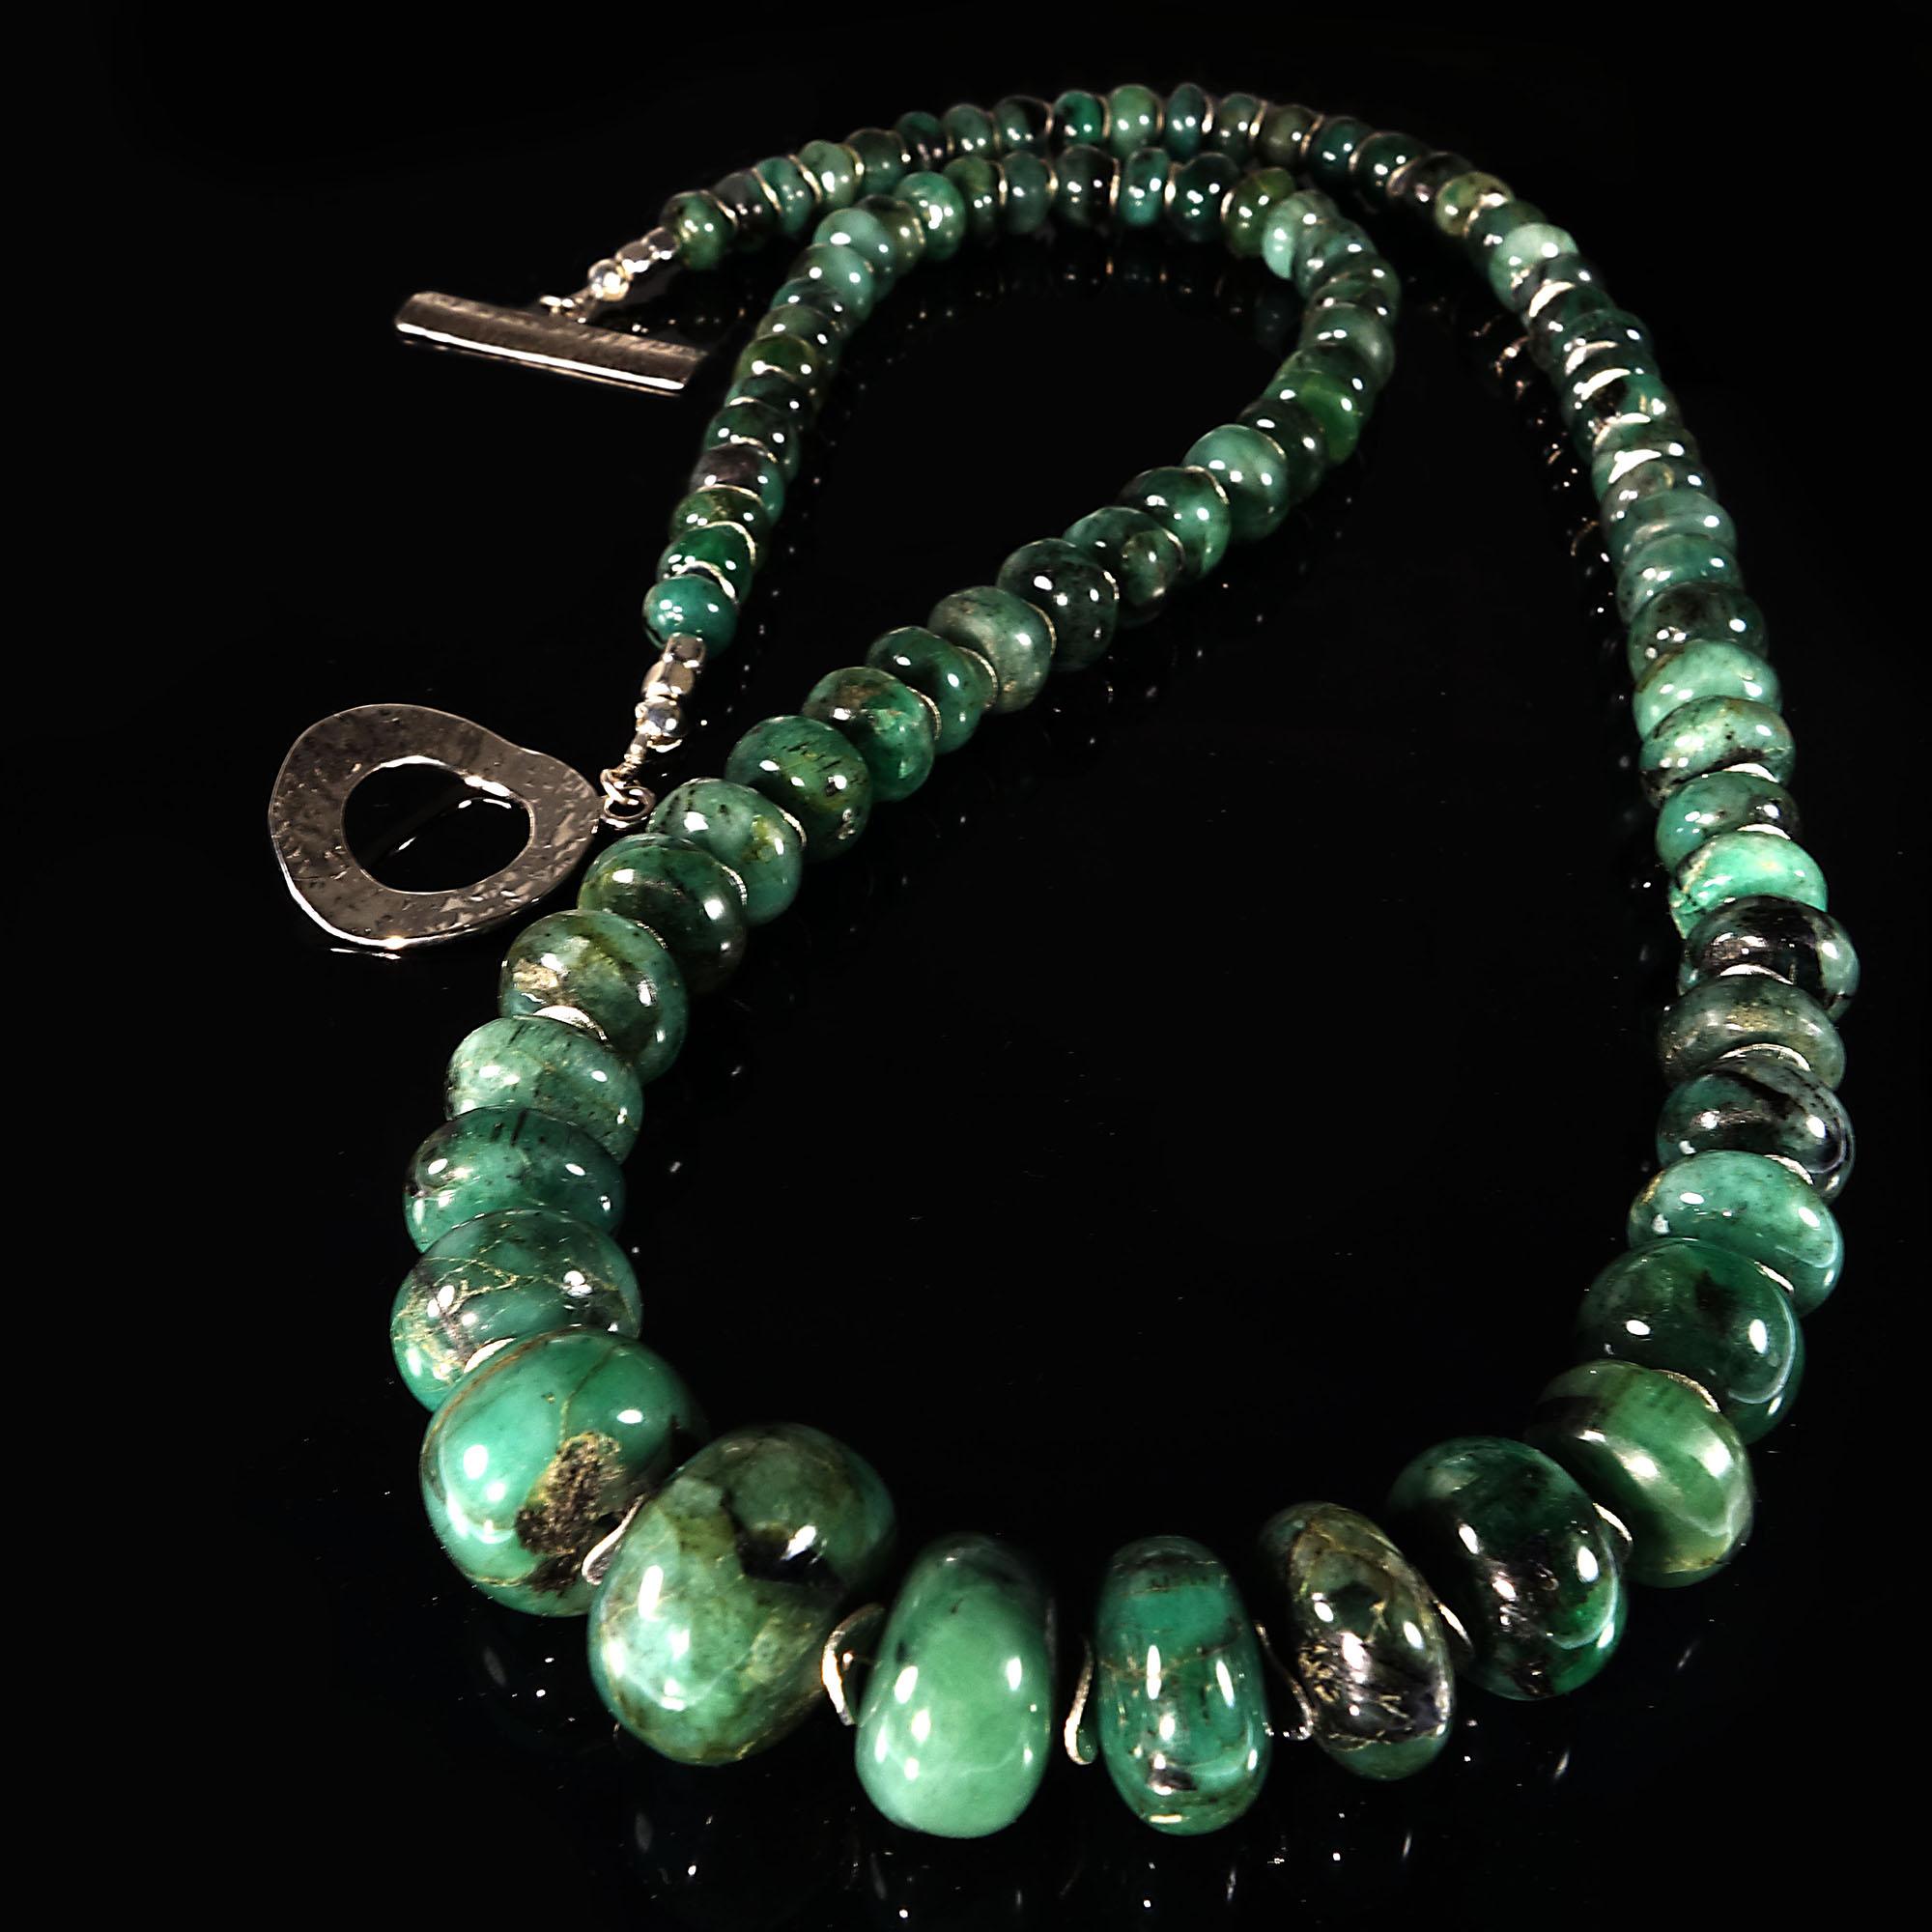 Graduated Emerald Rondelle Necklace with Silver Accents 5